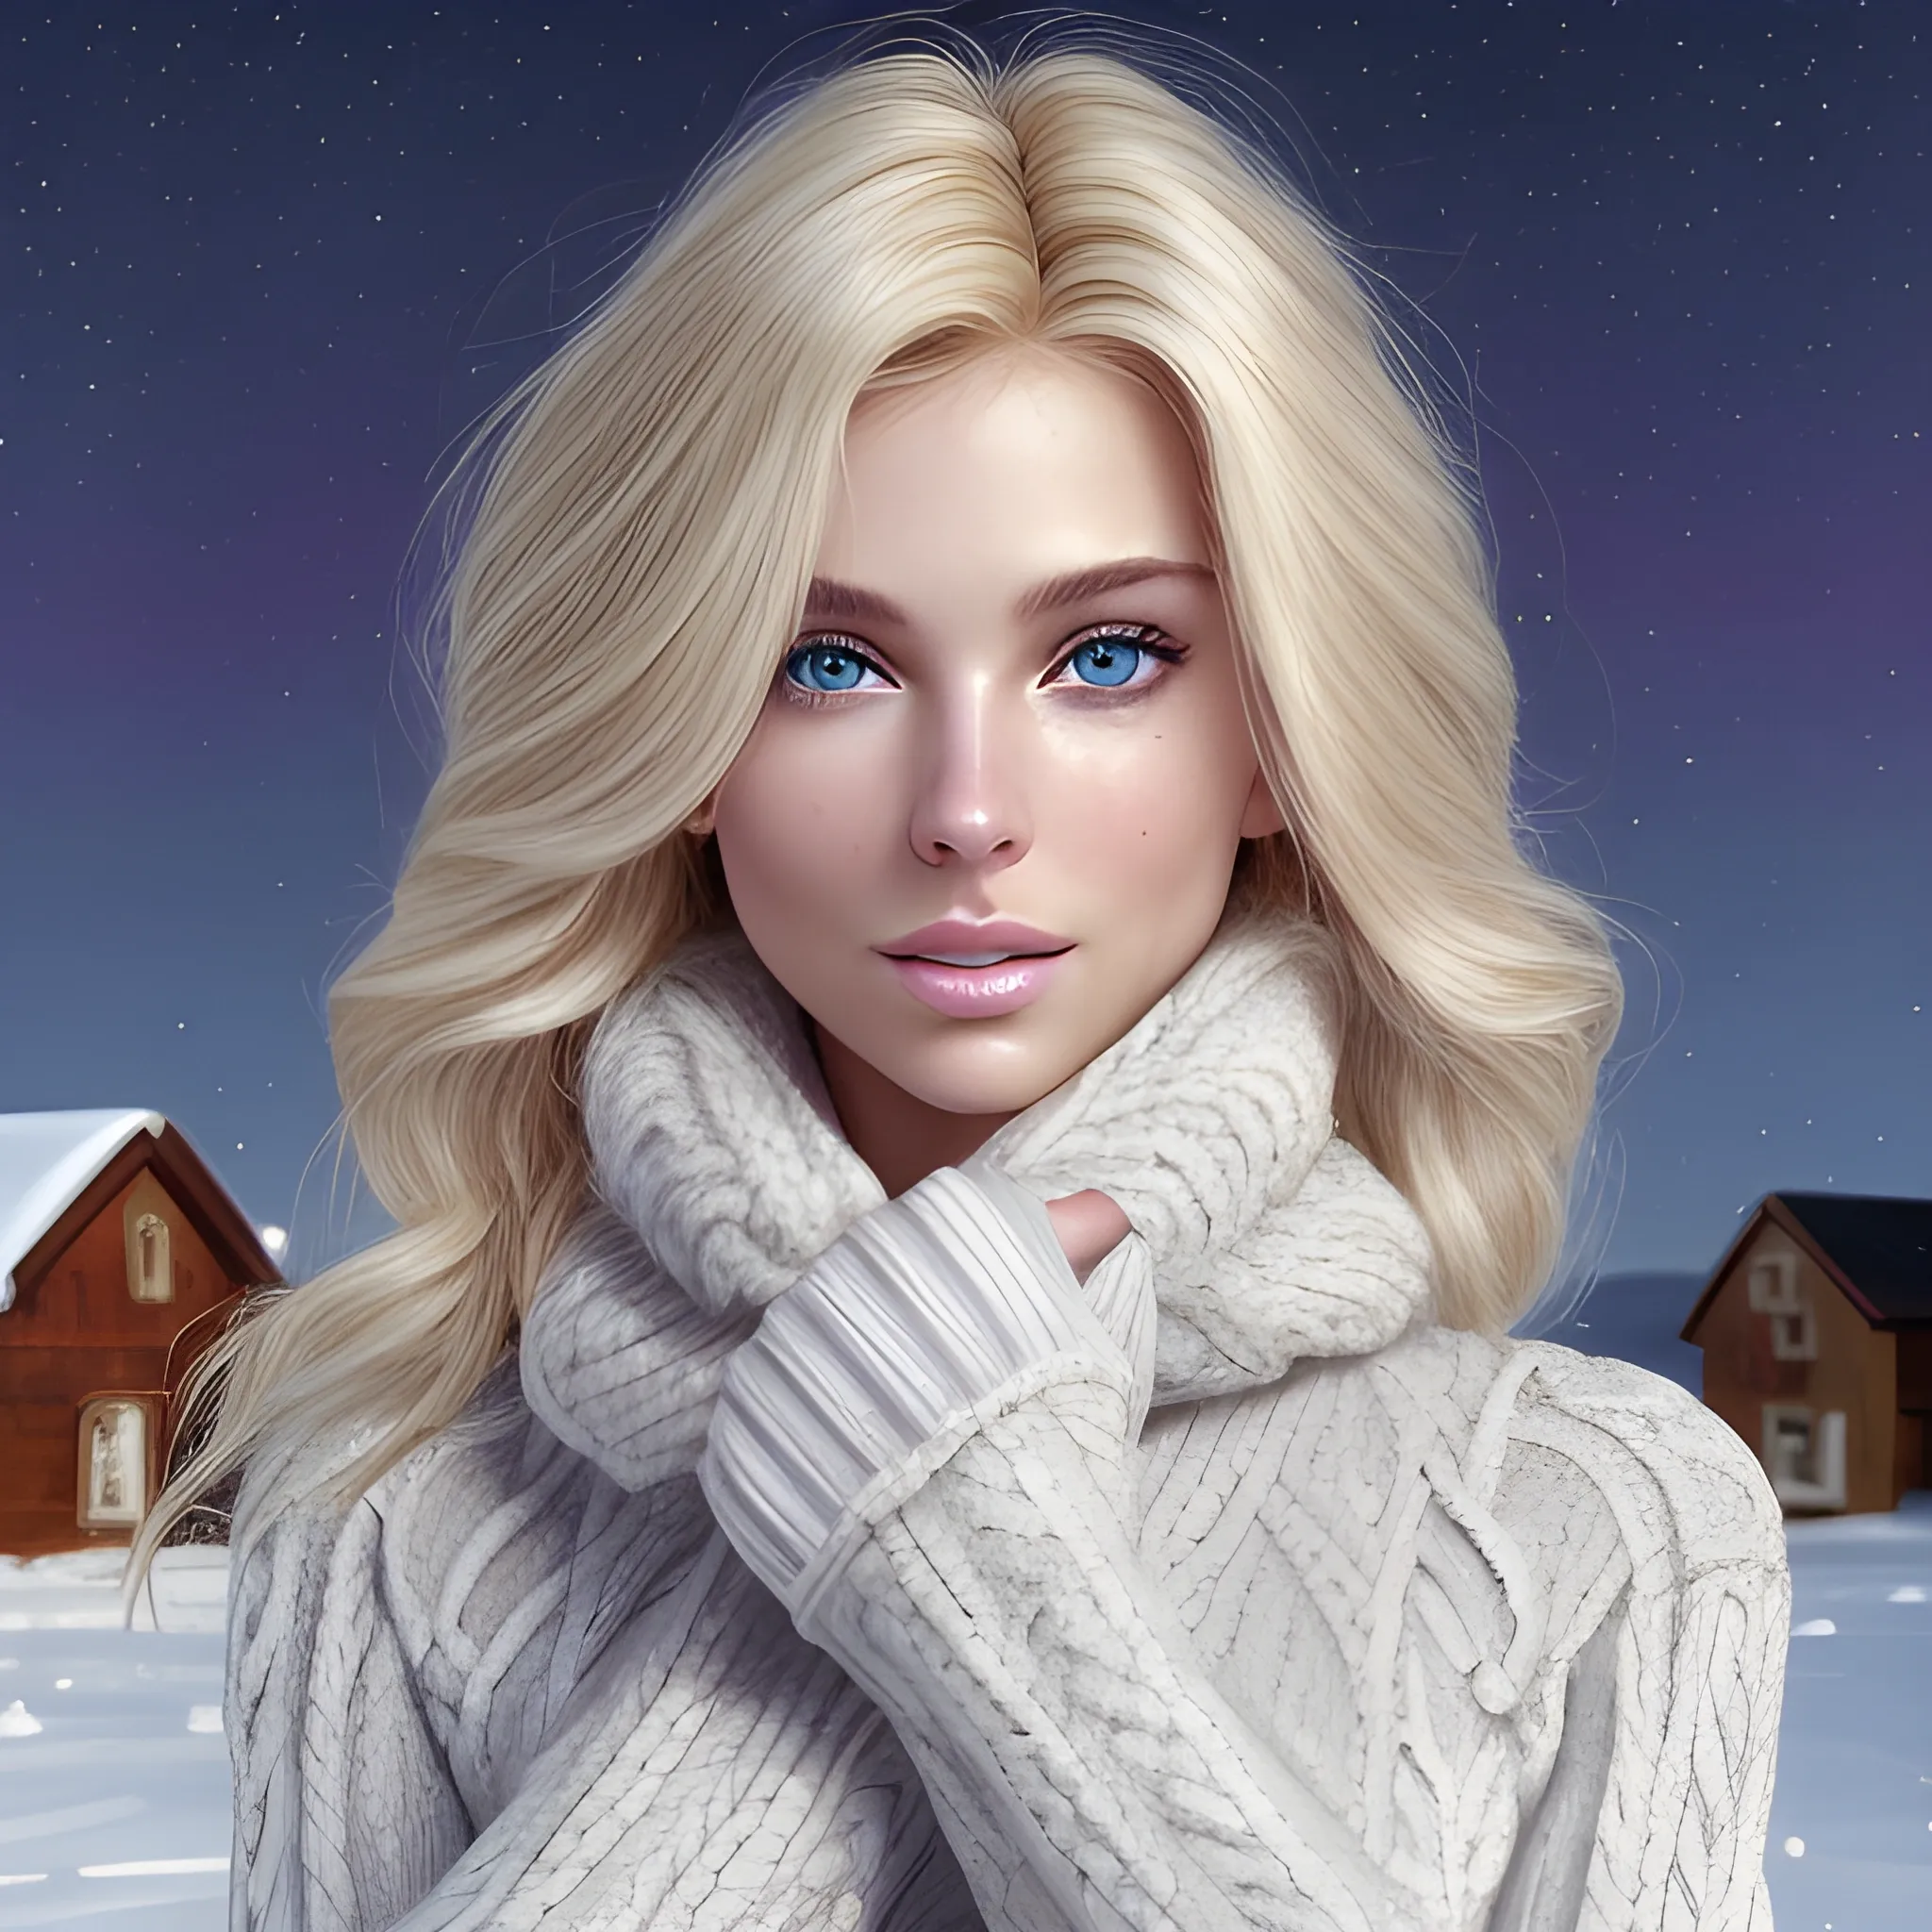 An ultra hot gorgeous European woman, age 23, blonde hair. she's a playmate, men magazine model. She has a subtle smile and flirts with the camera, 
In a snowy village, winter landscape, starry night, northern lights.
Sexy pose.
She wears a short loose wool sweater in a random color reminiscent of winter's colors.

Perfect anatomy, perfect hair, perfect breast, perfect body, perfect hands, perfect face, UHD, retina, masterpiece, accurate, anatomically correct, textured skin, super detail, high details, high quality, award winning, best quality, highres, 16k, 8k,